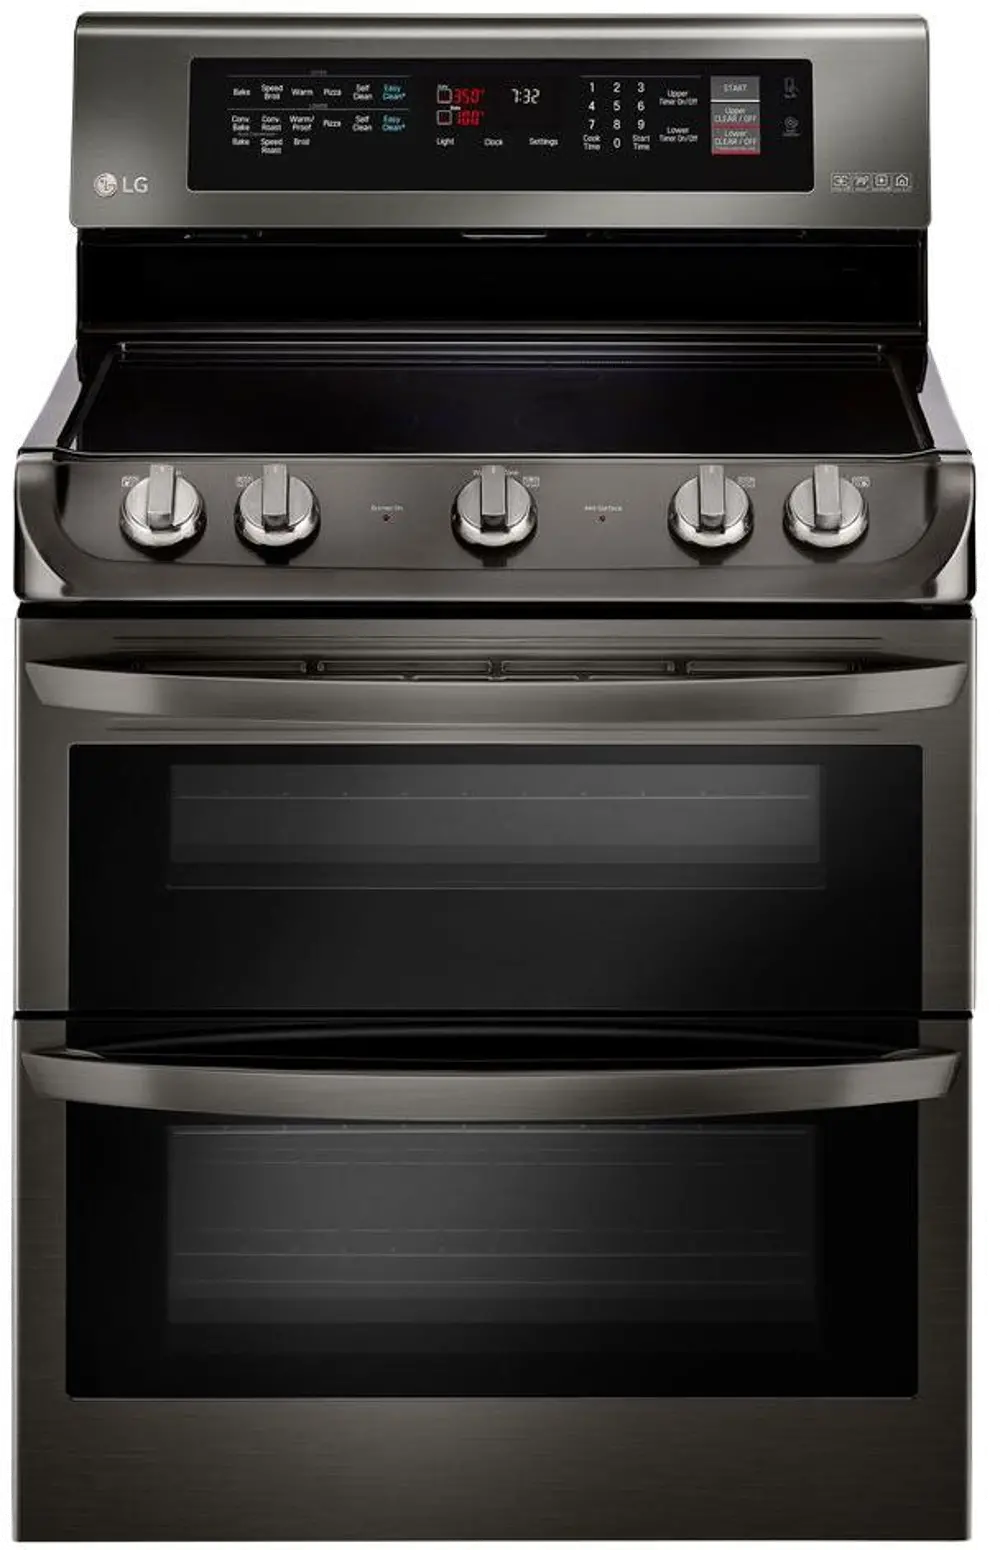 LDE4415BD LG Double Oven Electric Range - 7.3 cu. ft. Black Stainless Steel-1